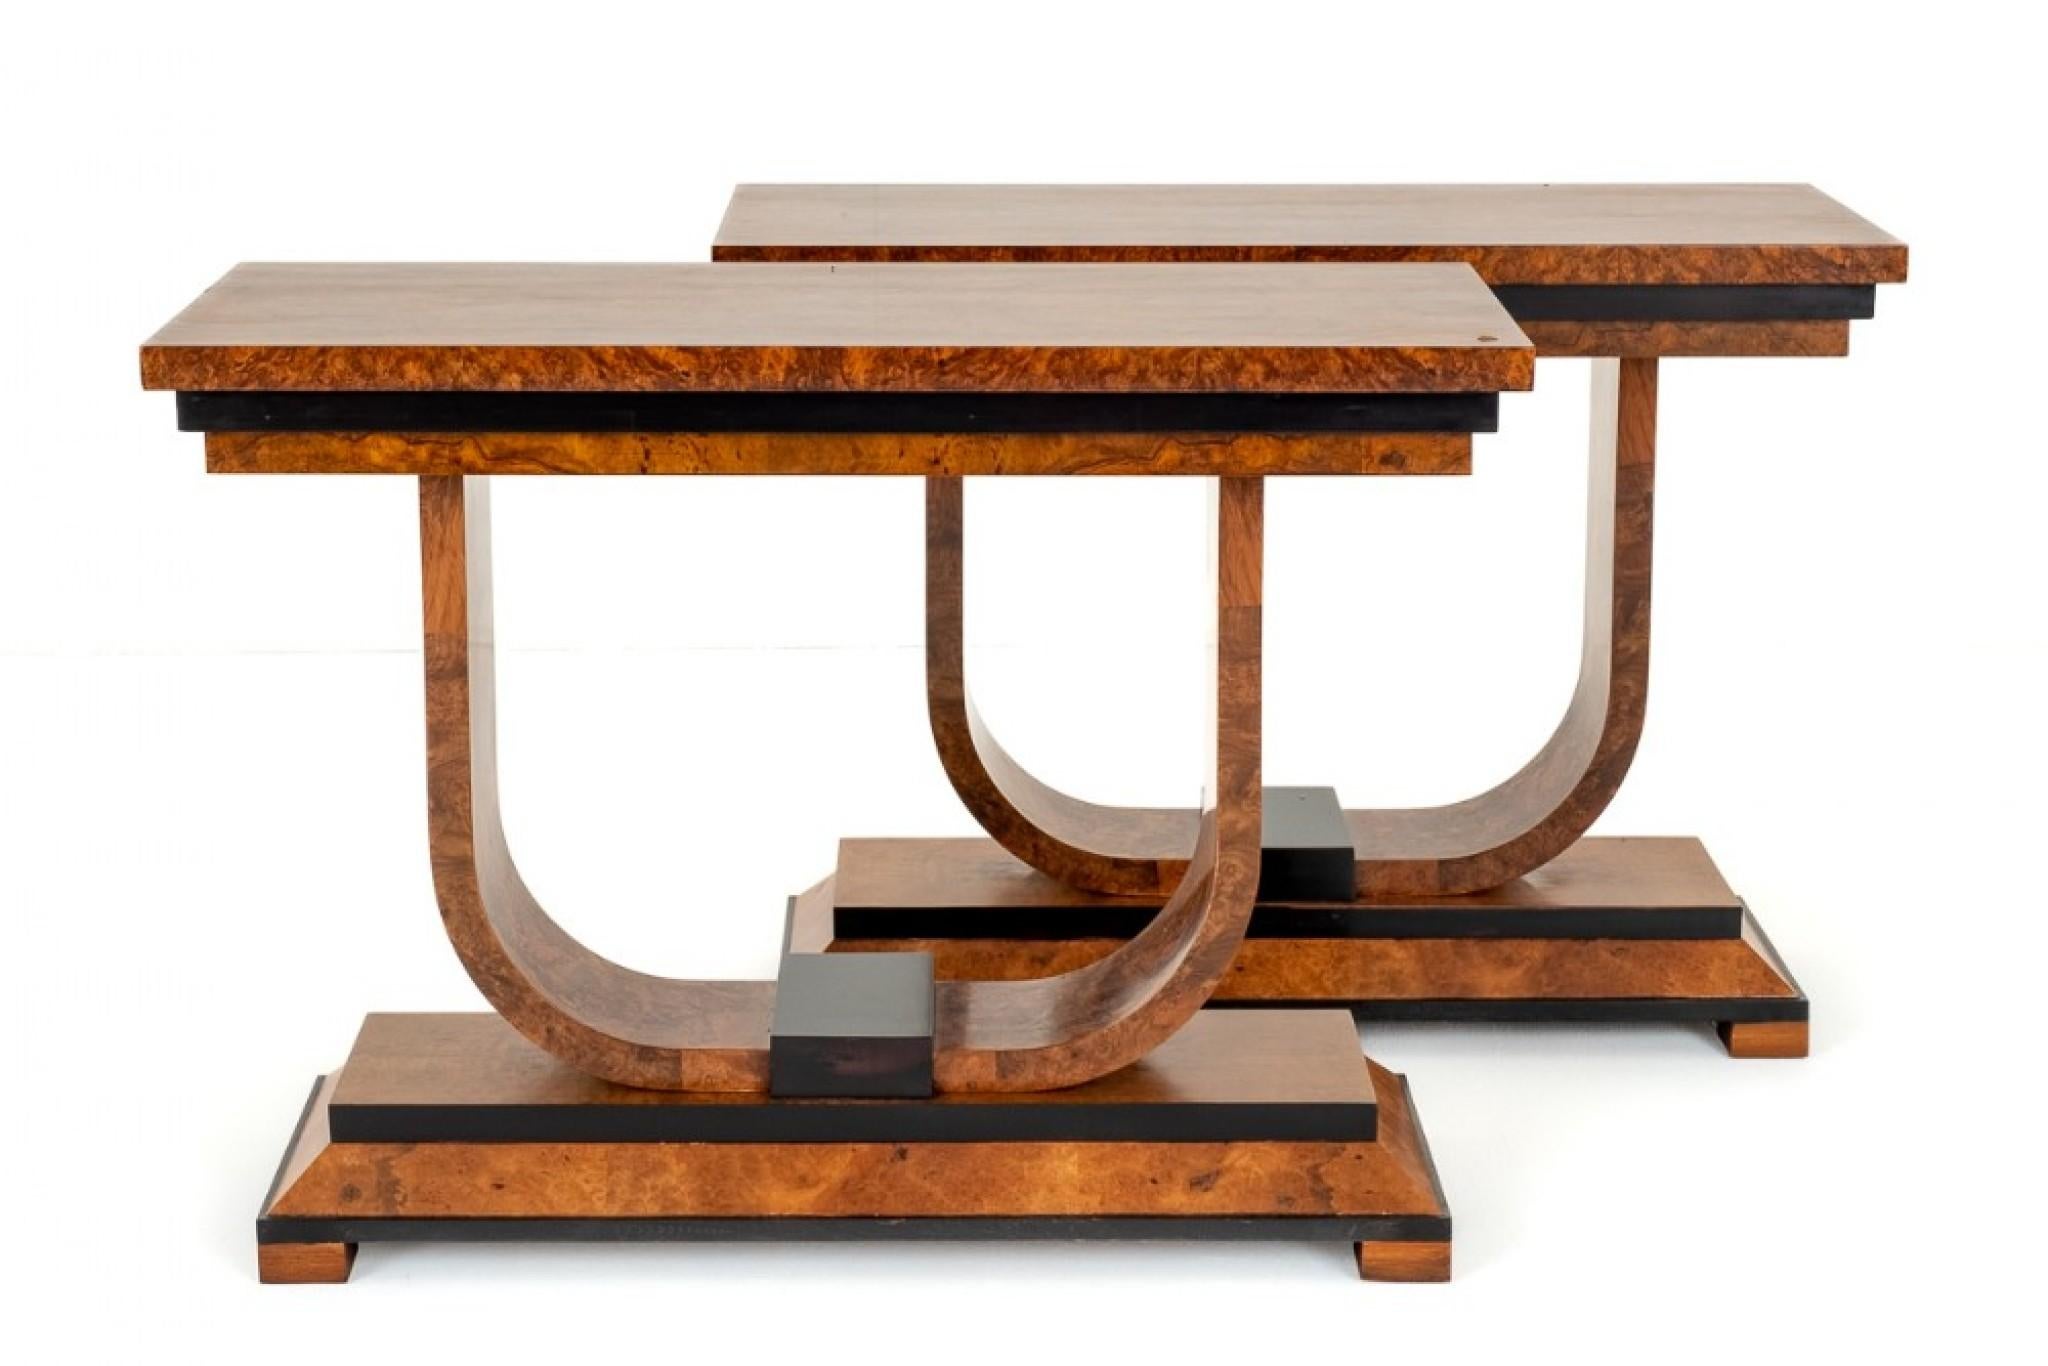 Stunning Pair of Art Deco Console Tables.
Circa 1930s
Here we Have a Wonderful Pair of Art Deco Console Tables.
These Table Feature The Usual Art Deco Themes of Shaped base and Block Feet.
The Tops of The Tables are Raised Upon Shaped Supports and